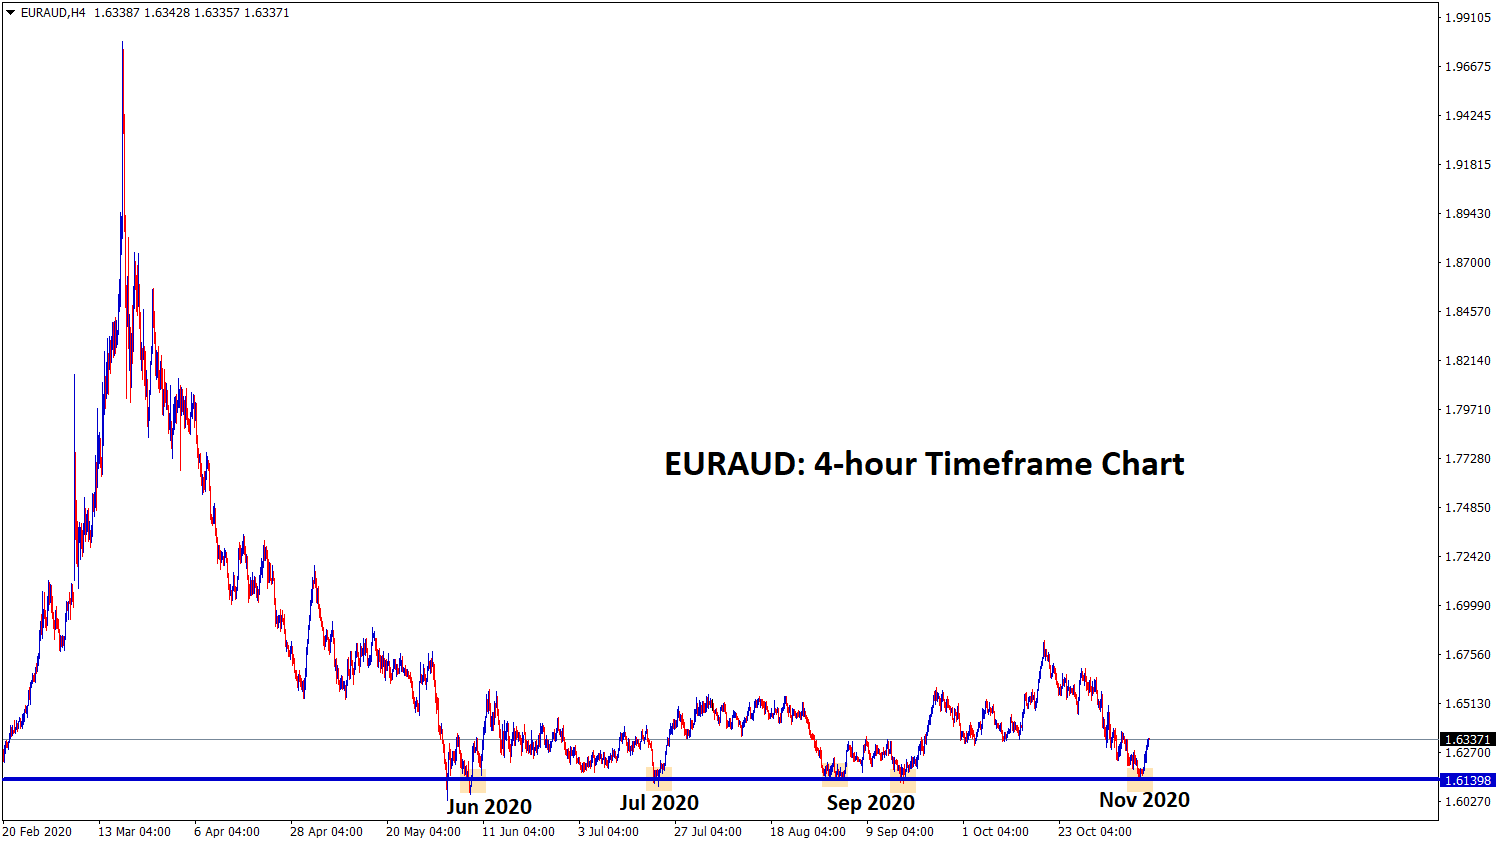 EURAUD reach the Strong Support zone and bouncing back